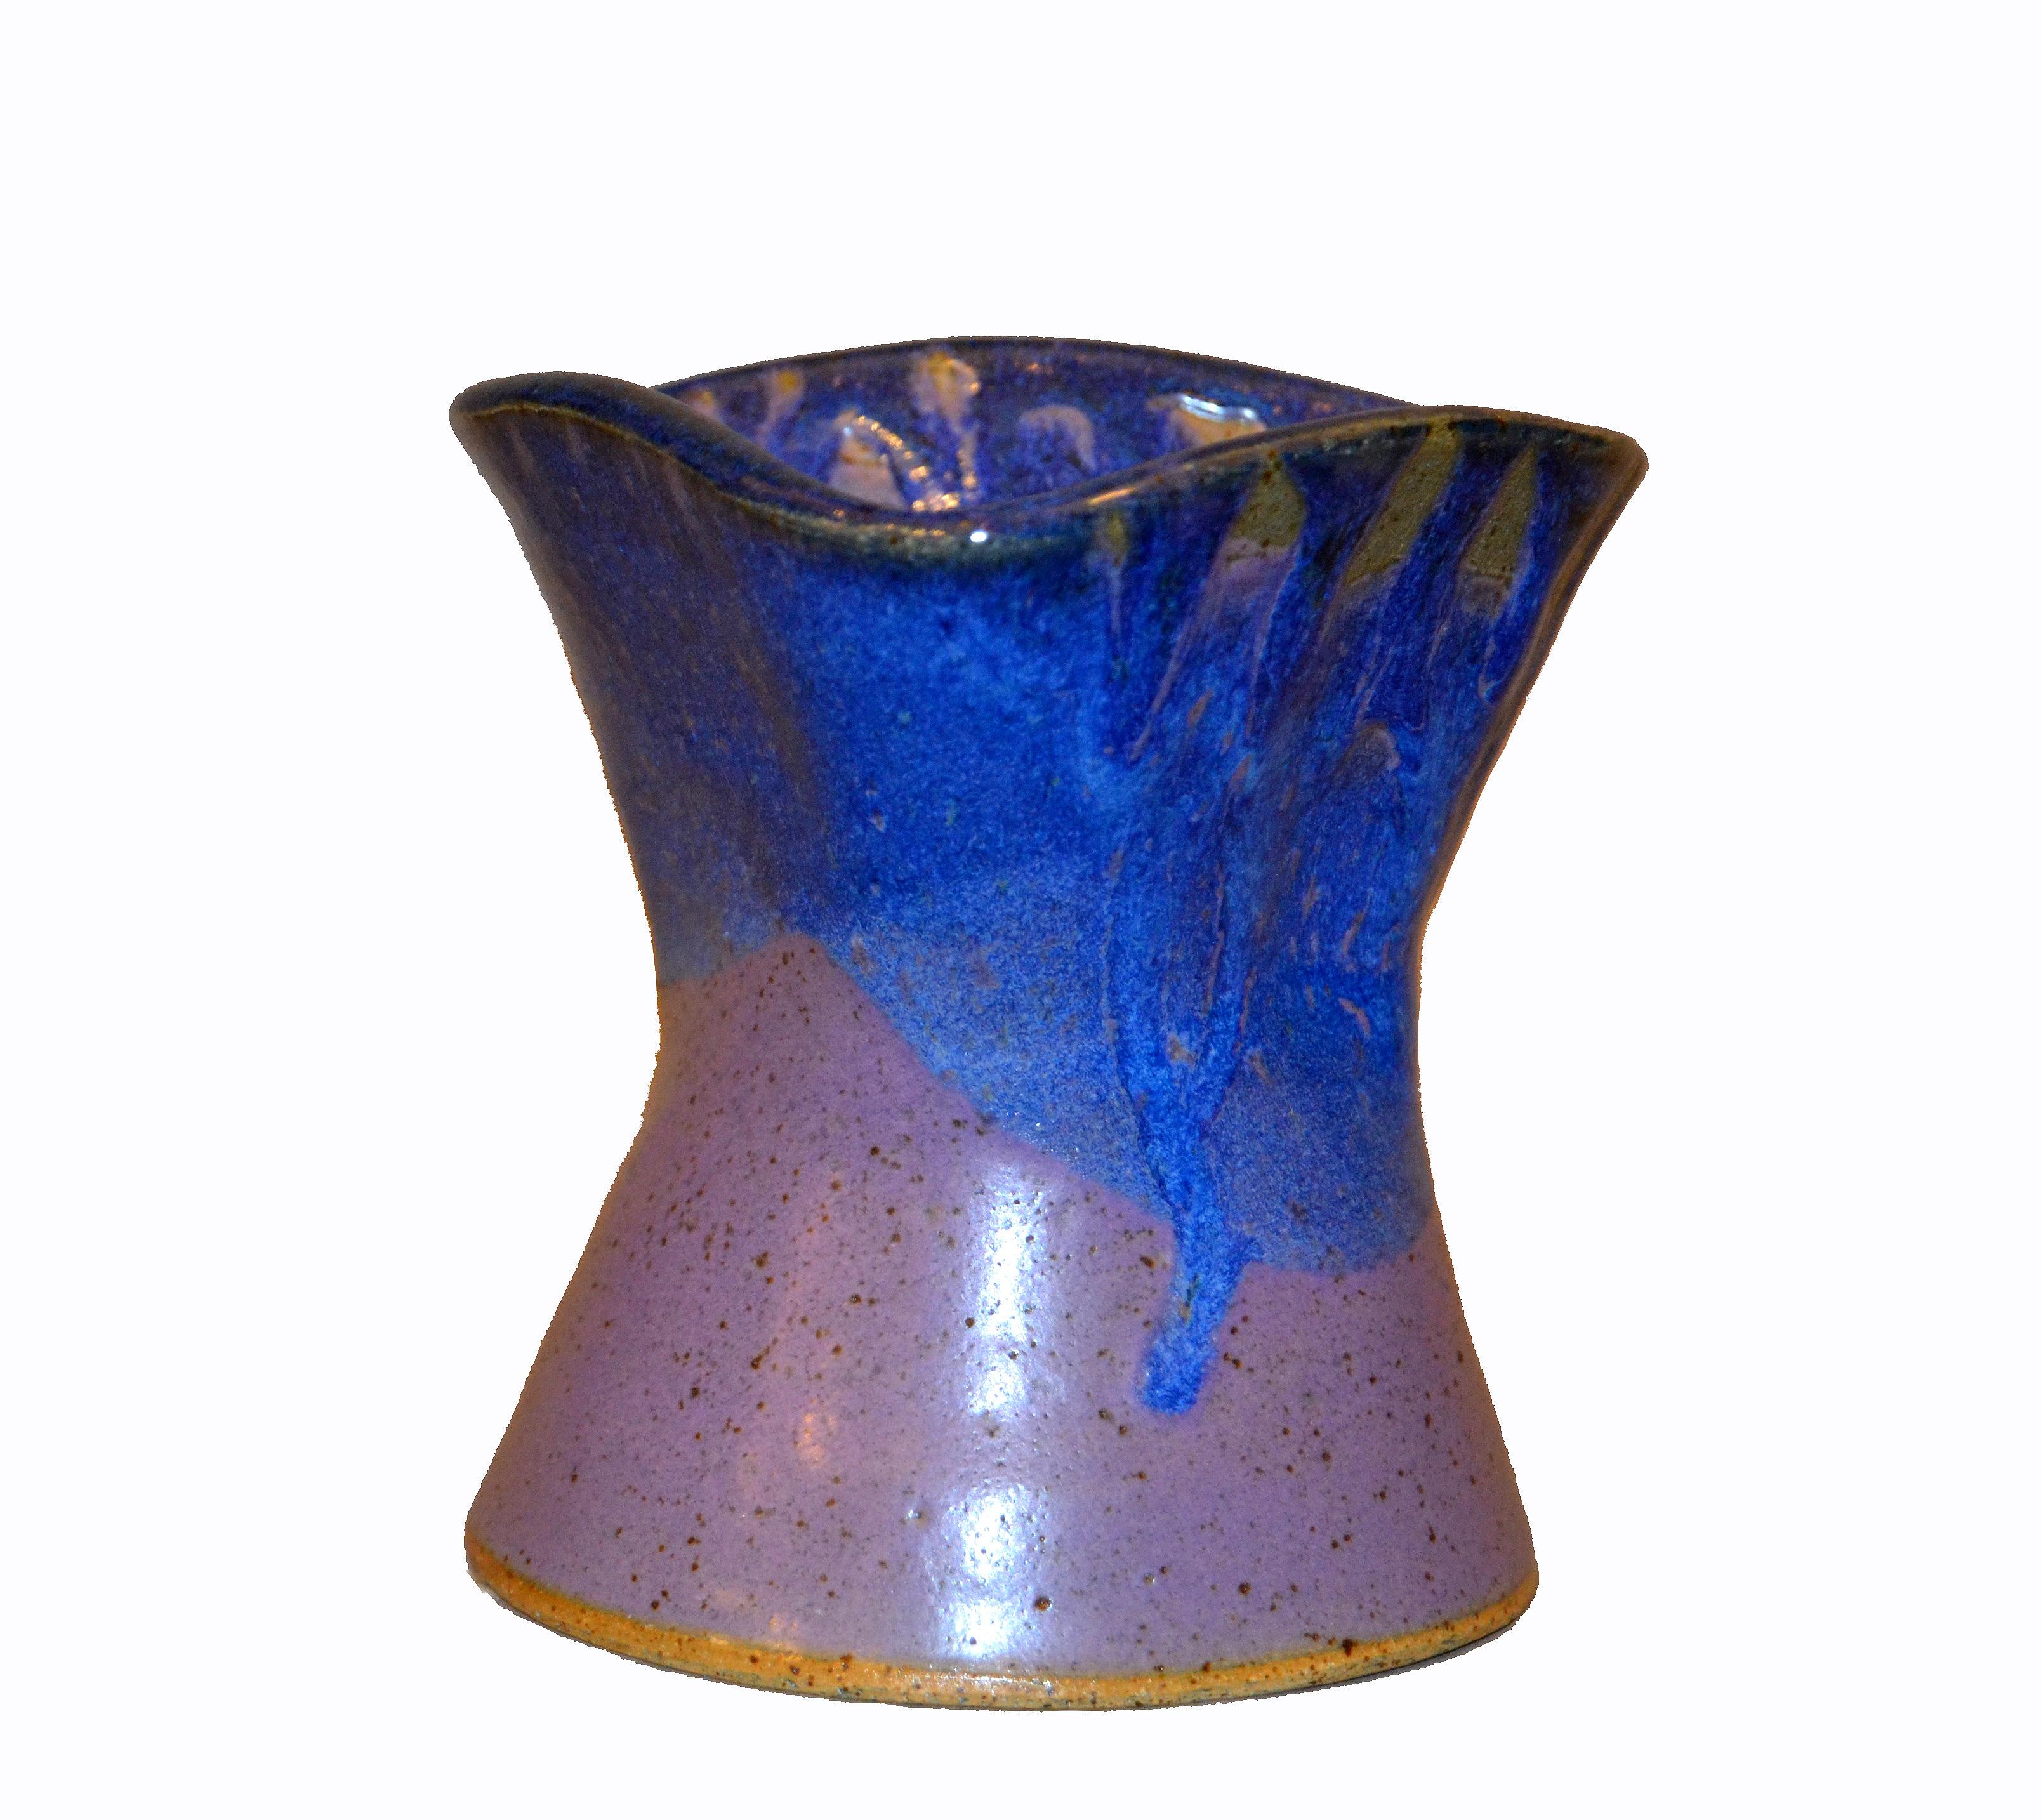 Ann Newberry glazed Purple, Blue and gray Pottery ceramic bowl, vase, vessel.
Signed by Artist at the base and original label inside.
This decorative vase creates ambiance and adds natural beauty throughout your home.